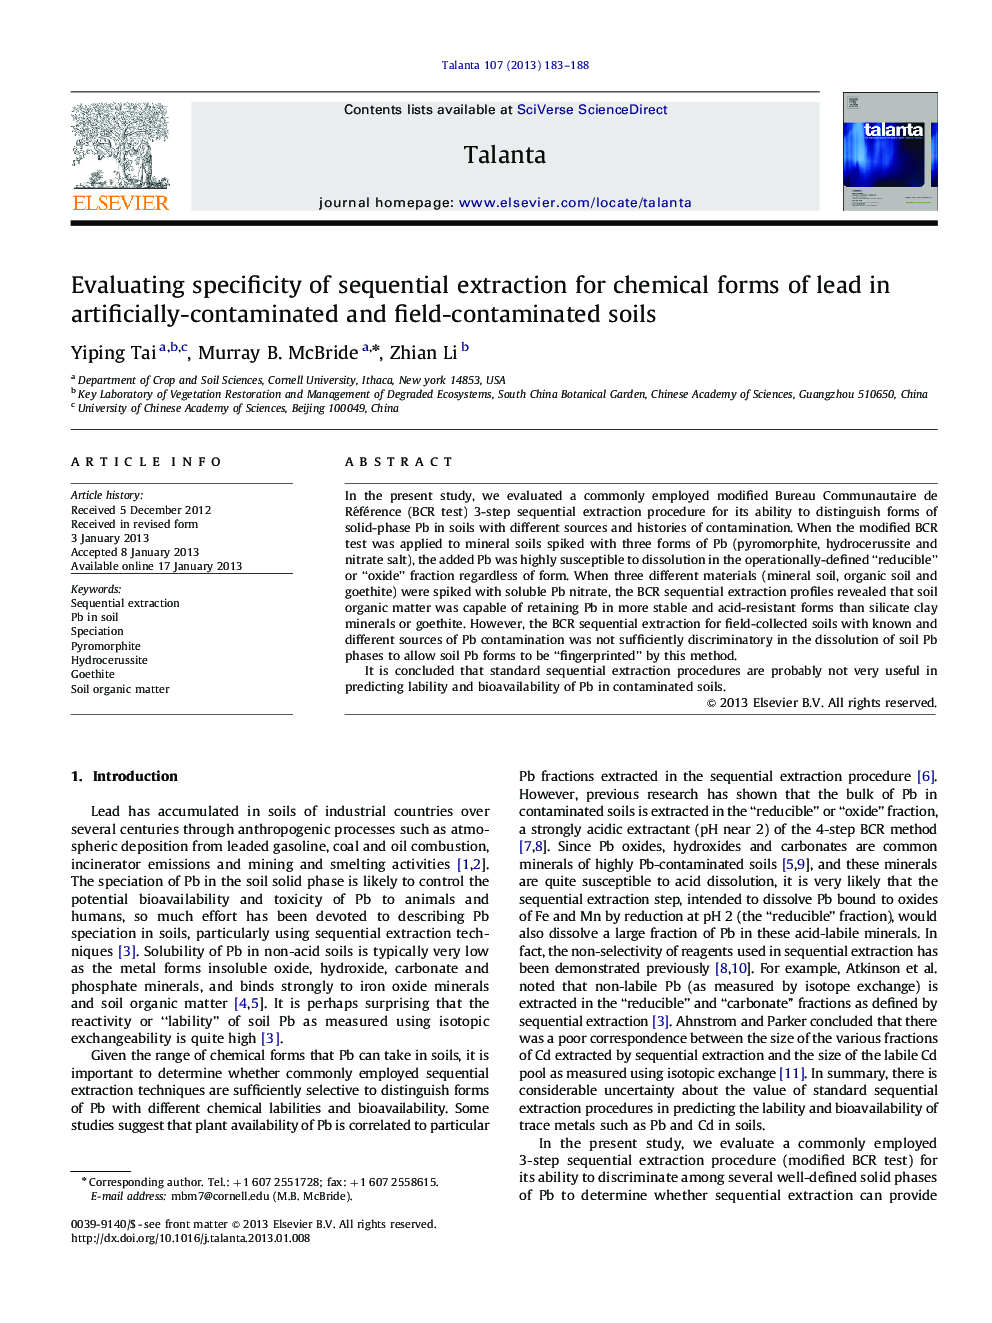 Evaluating specificity of sequential extraction for chemical forms of lead in artificially-contaminated and field-contaminated soils